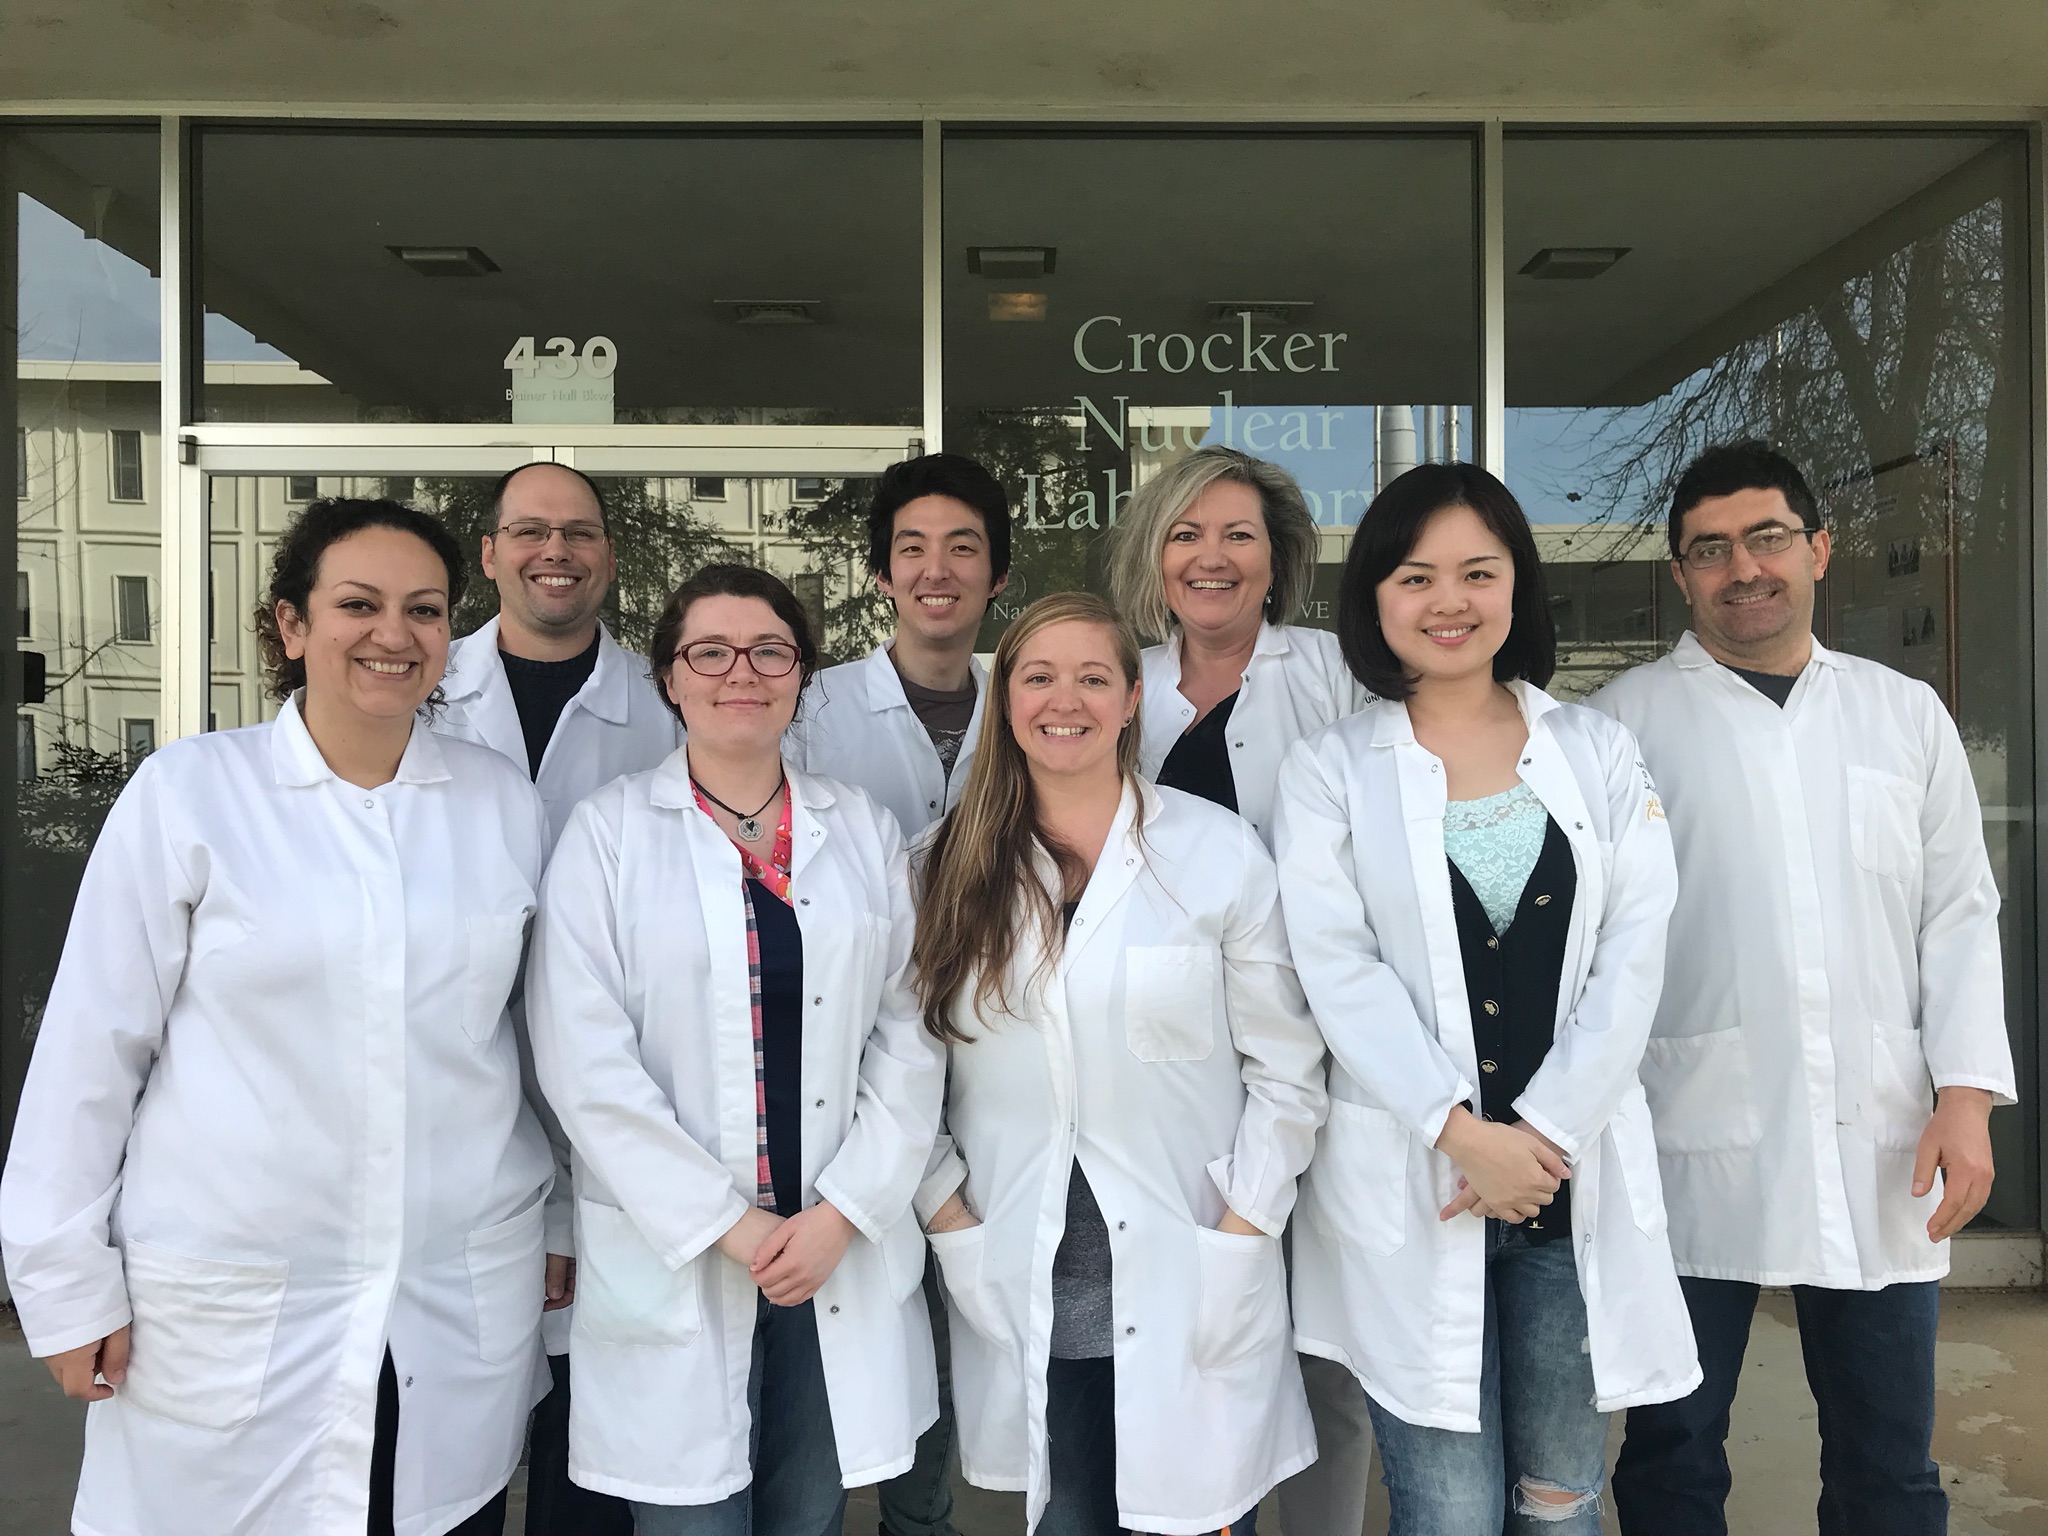 Image: photo of lab staff in front of Crocker Nuclear Lab building.